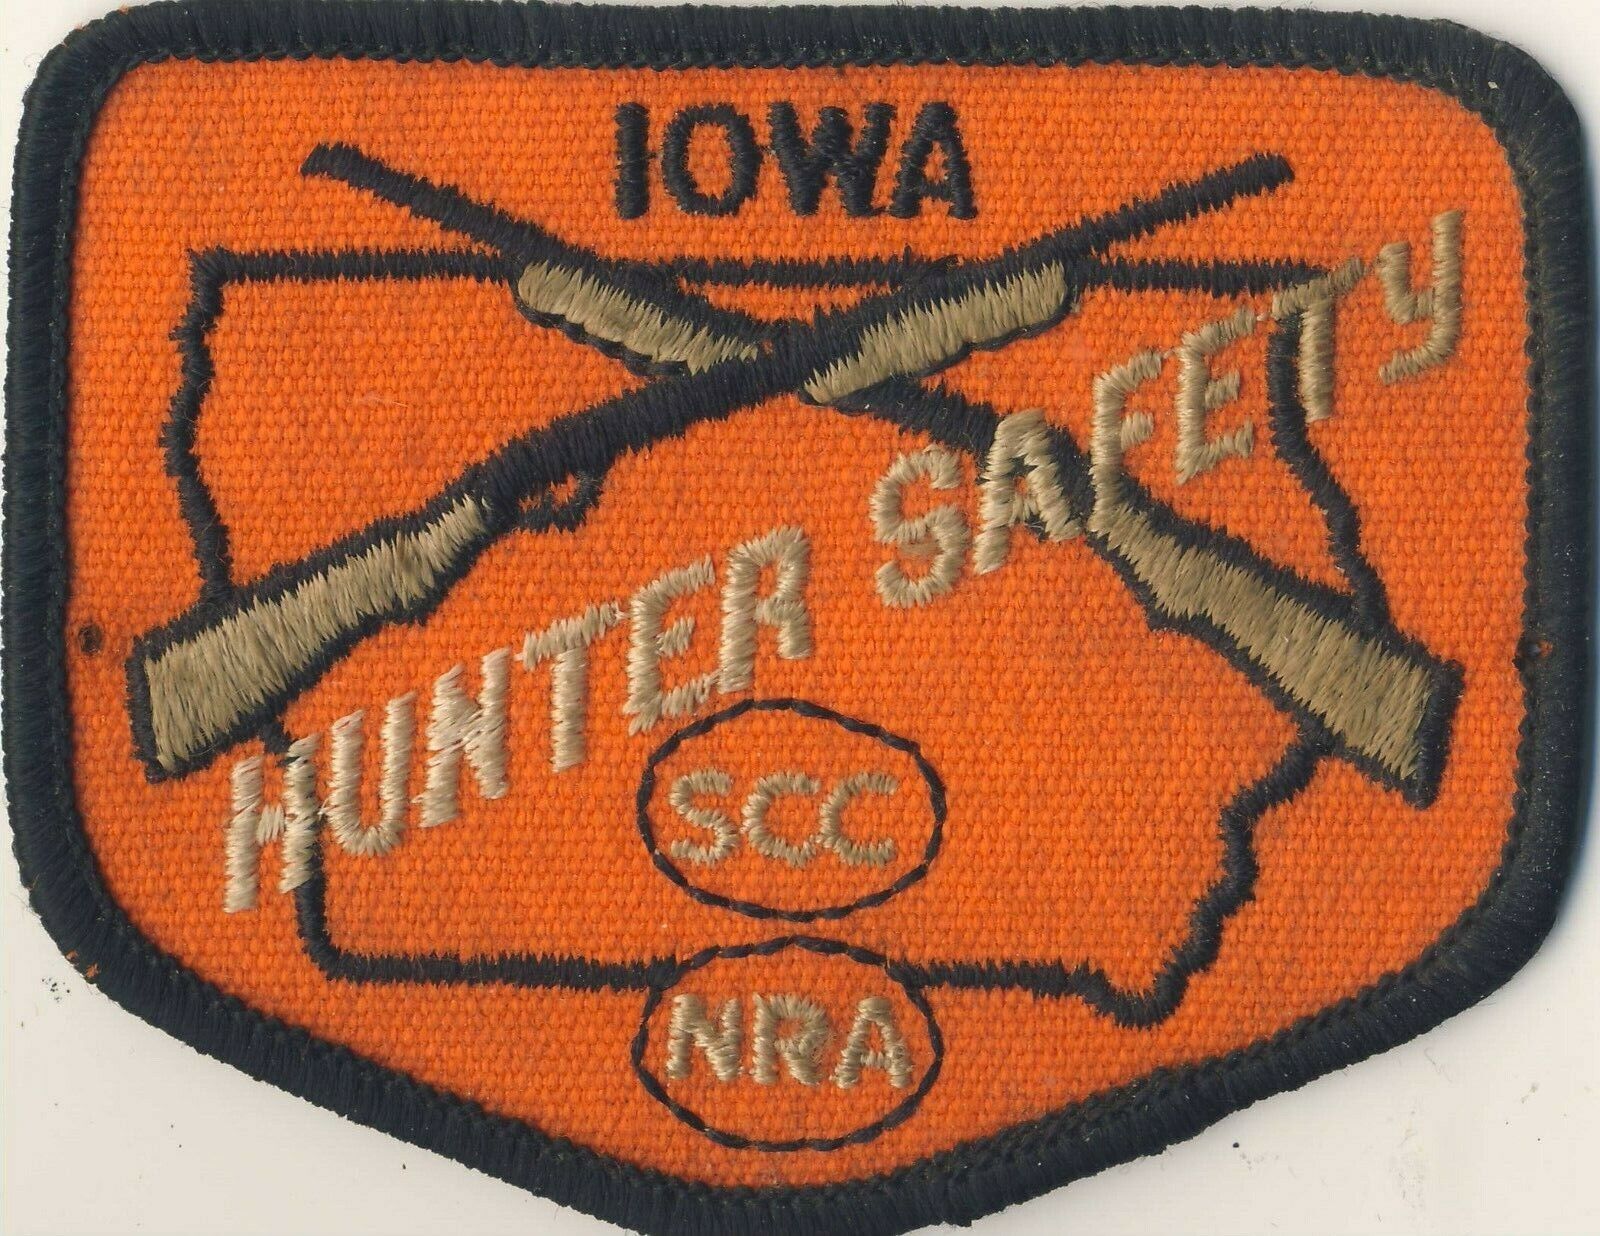 Iowa IA Hunter Safety SCC NRA Limited Special Price Patch 2.75